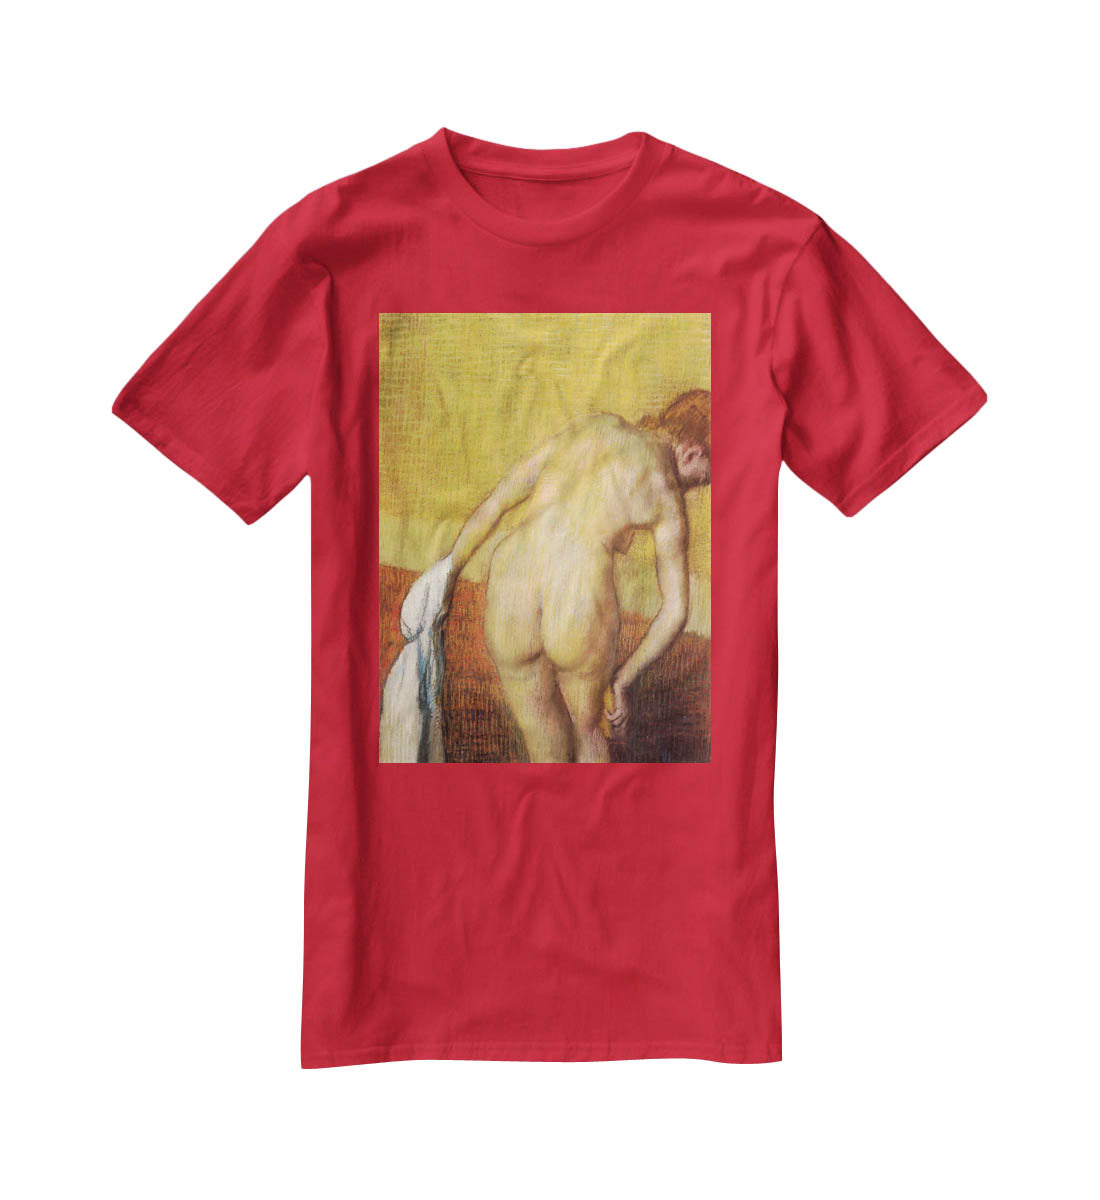 Woman Drying with towel and sponge by Degas T-Shirt - Canvas Art Rocks - 4